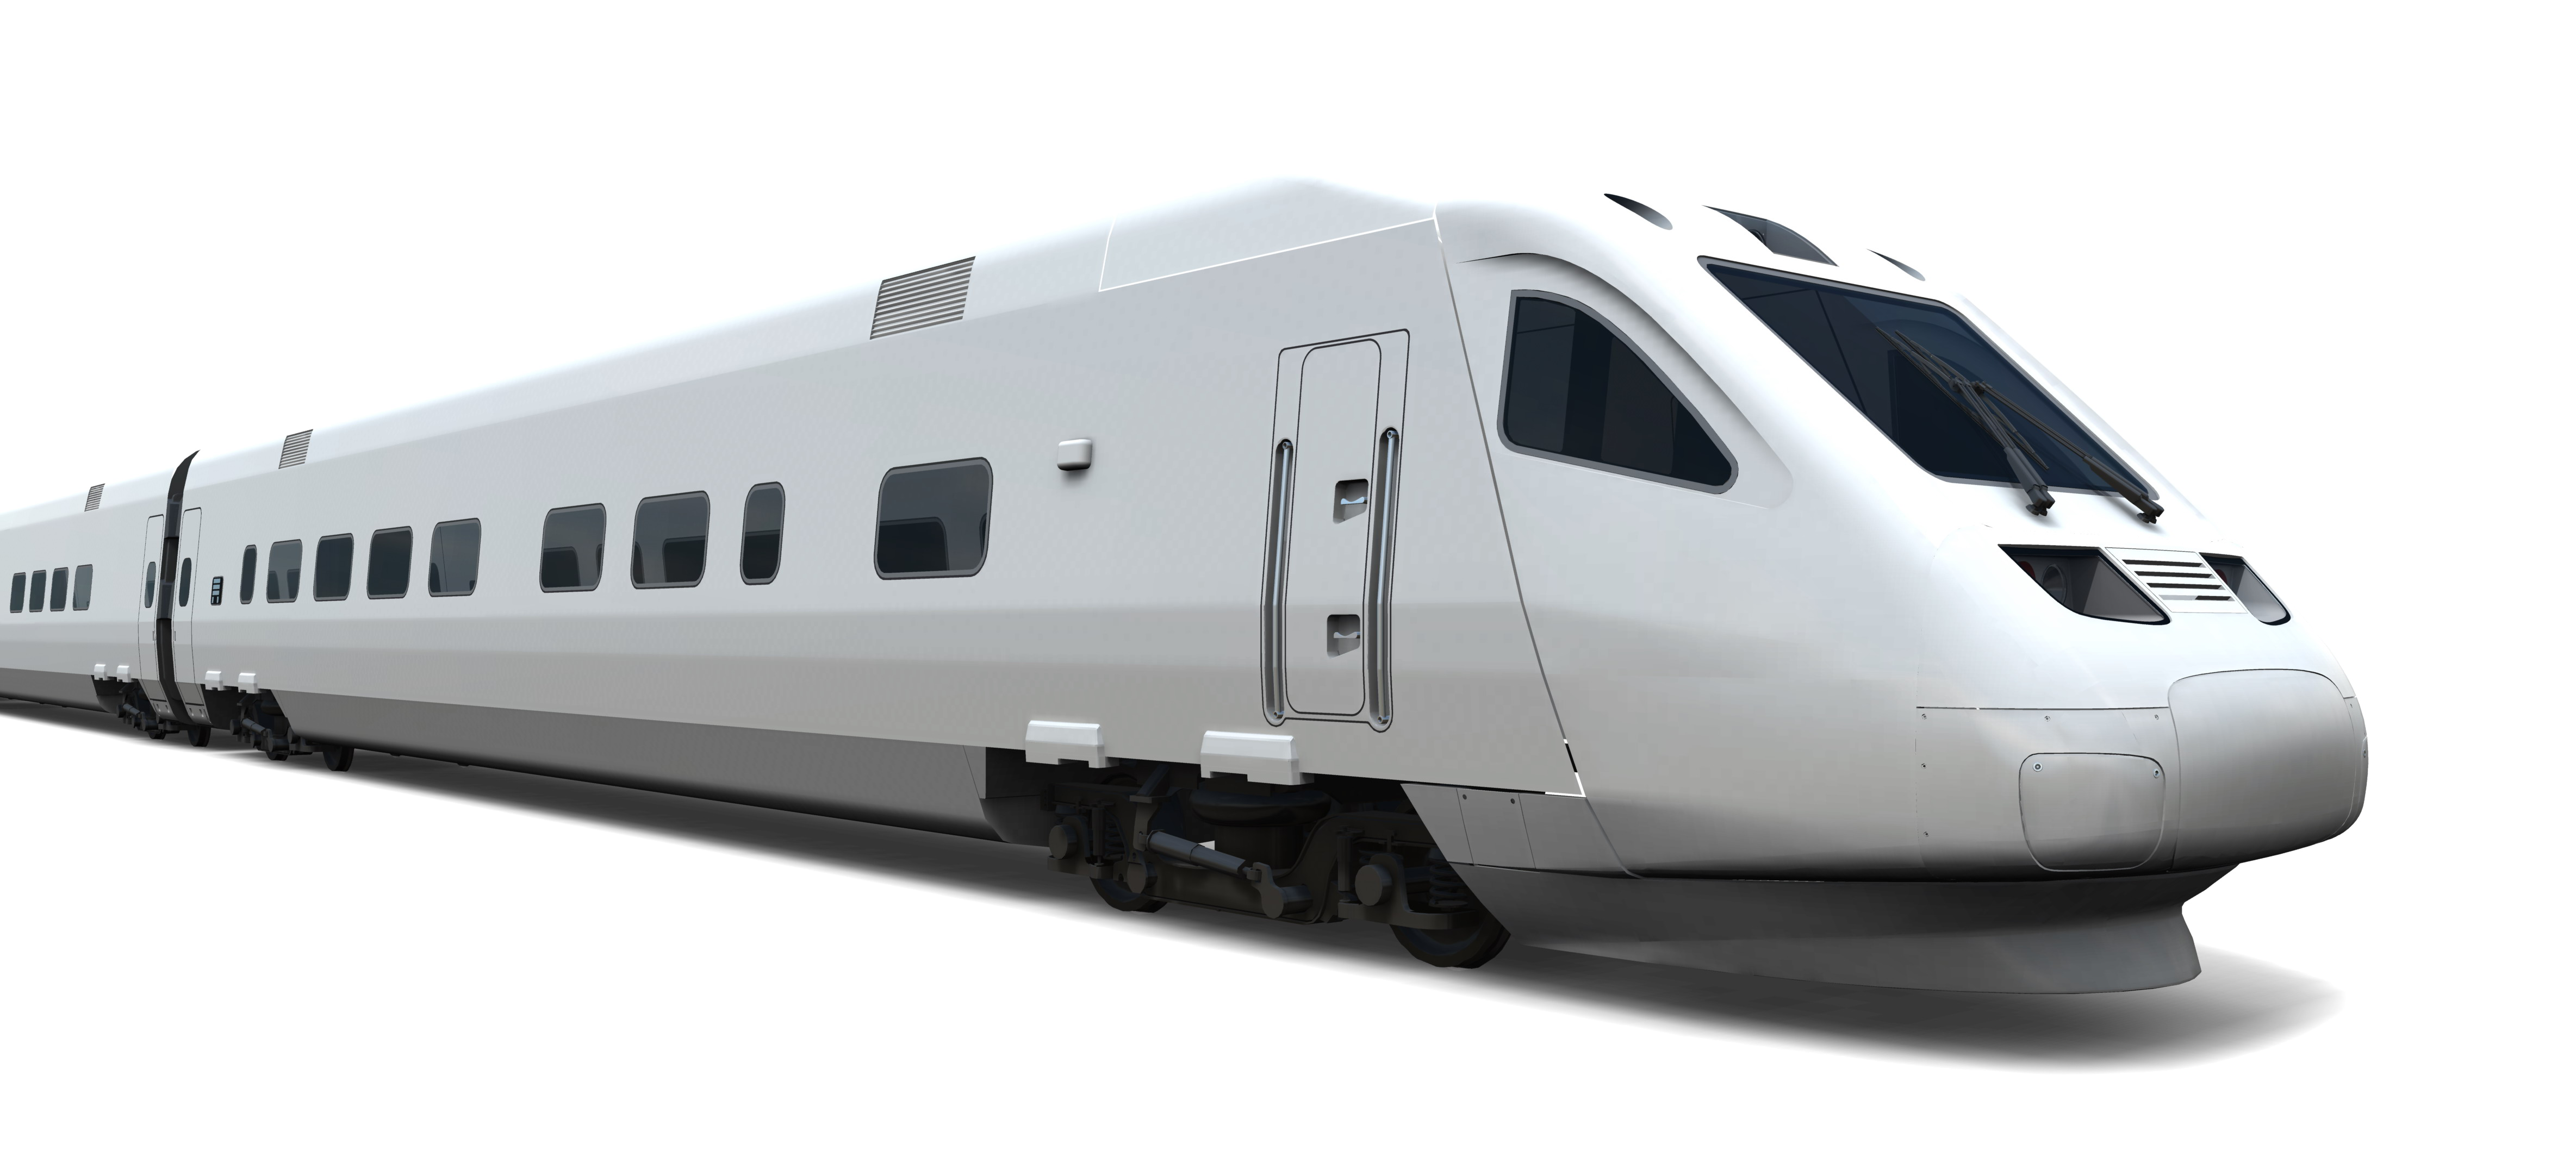 Balle train PNG pic